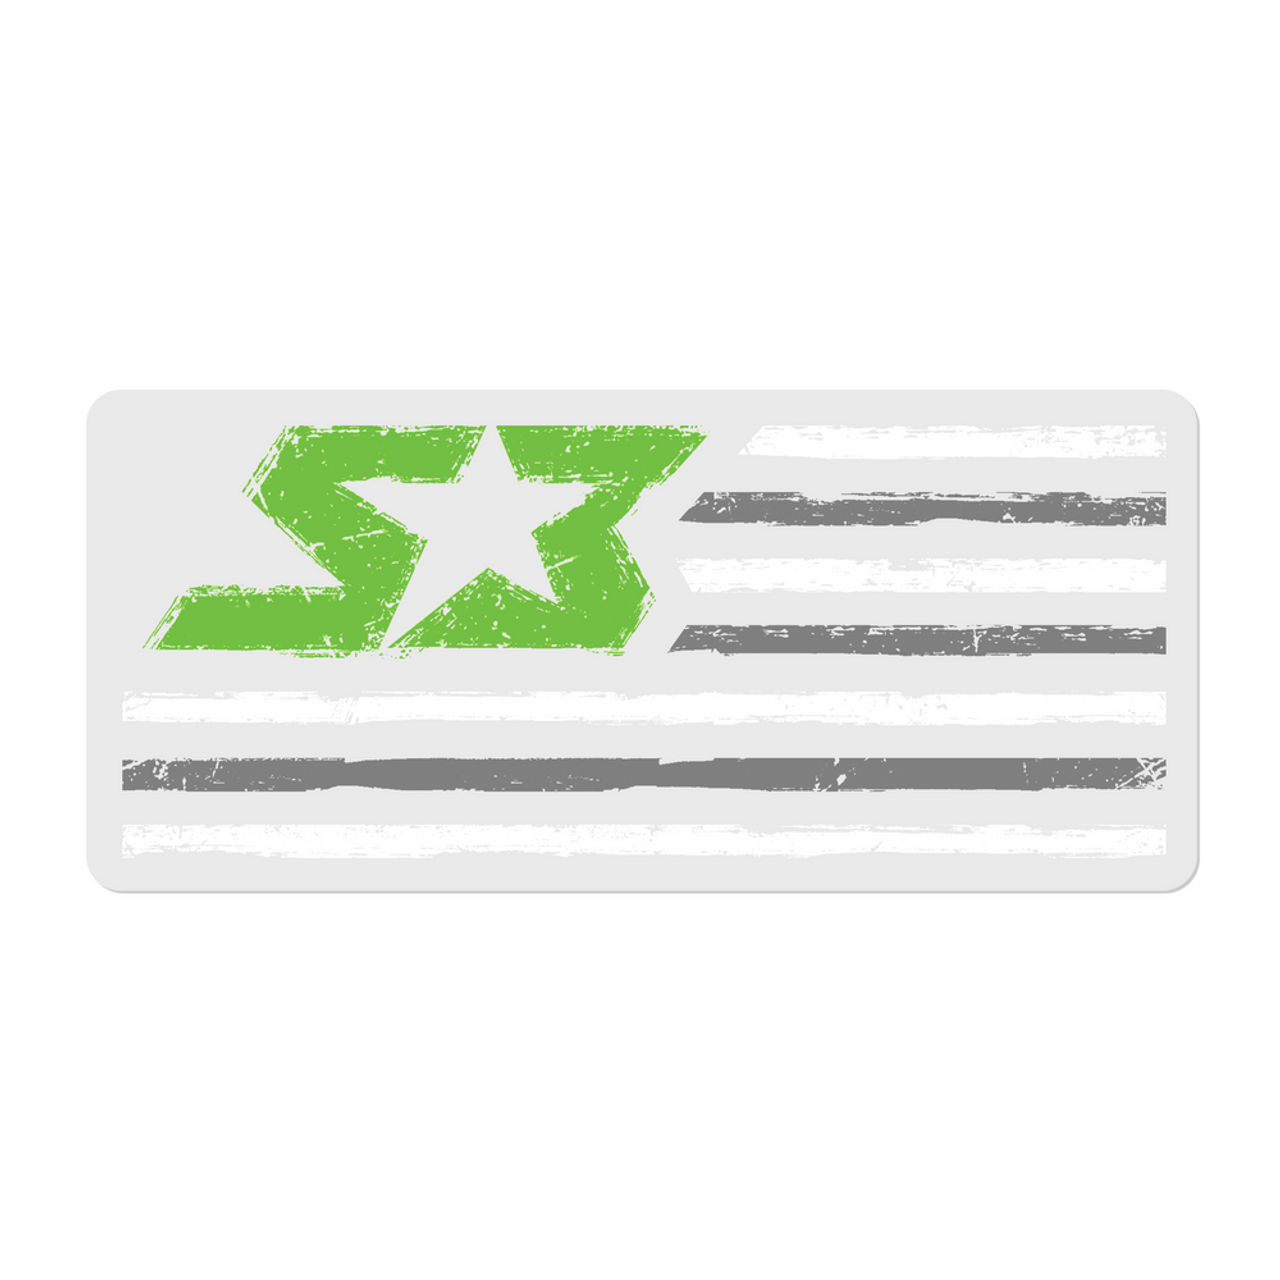 Off White Logo - Off White Logo Sticker PNG Image With Transparent